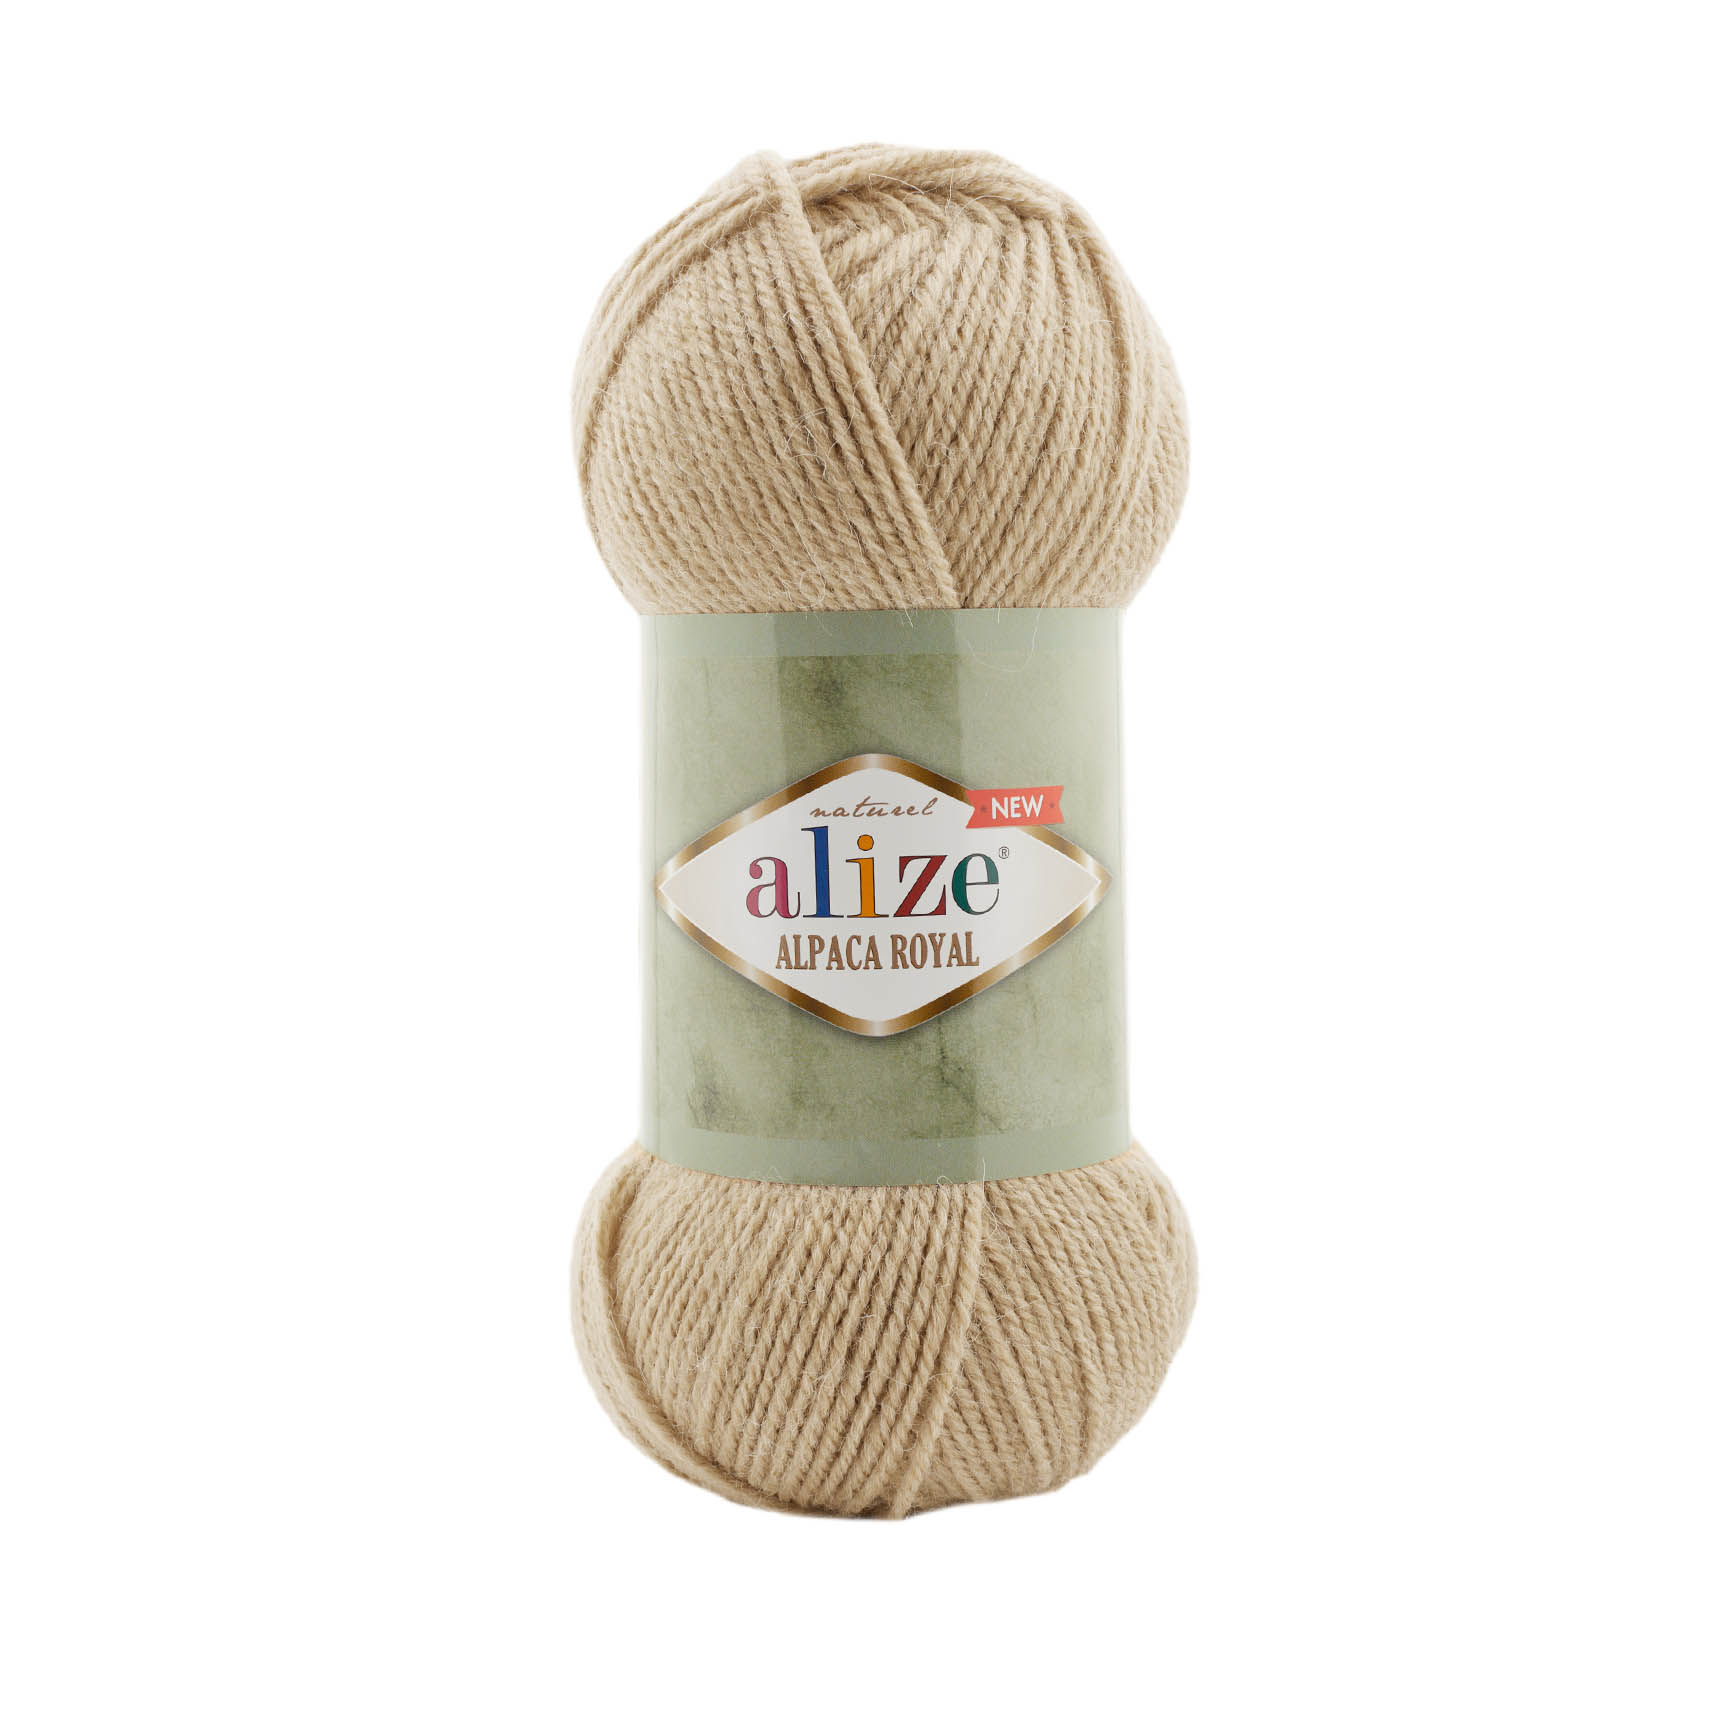 Buy ALIZE ALPACA ROYAL NEW From ALIZE Online